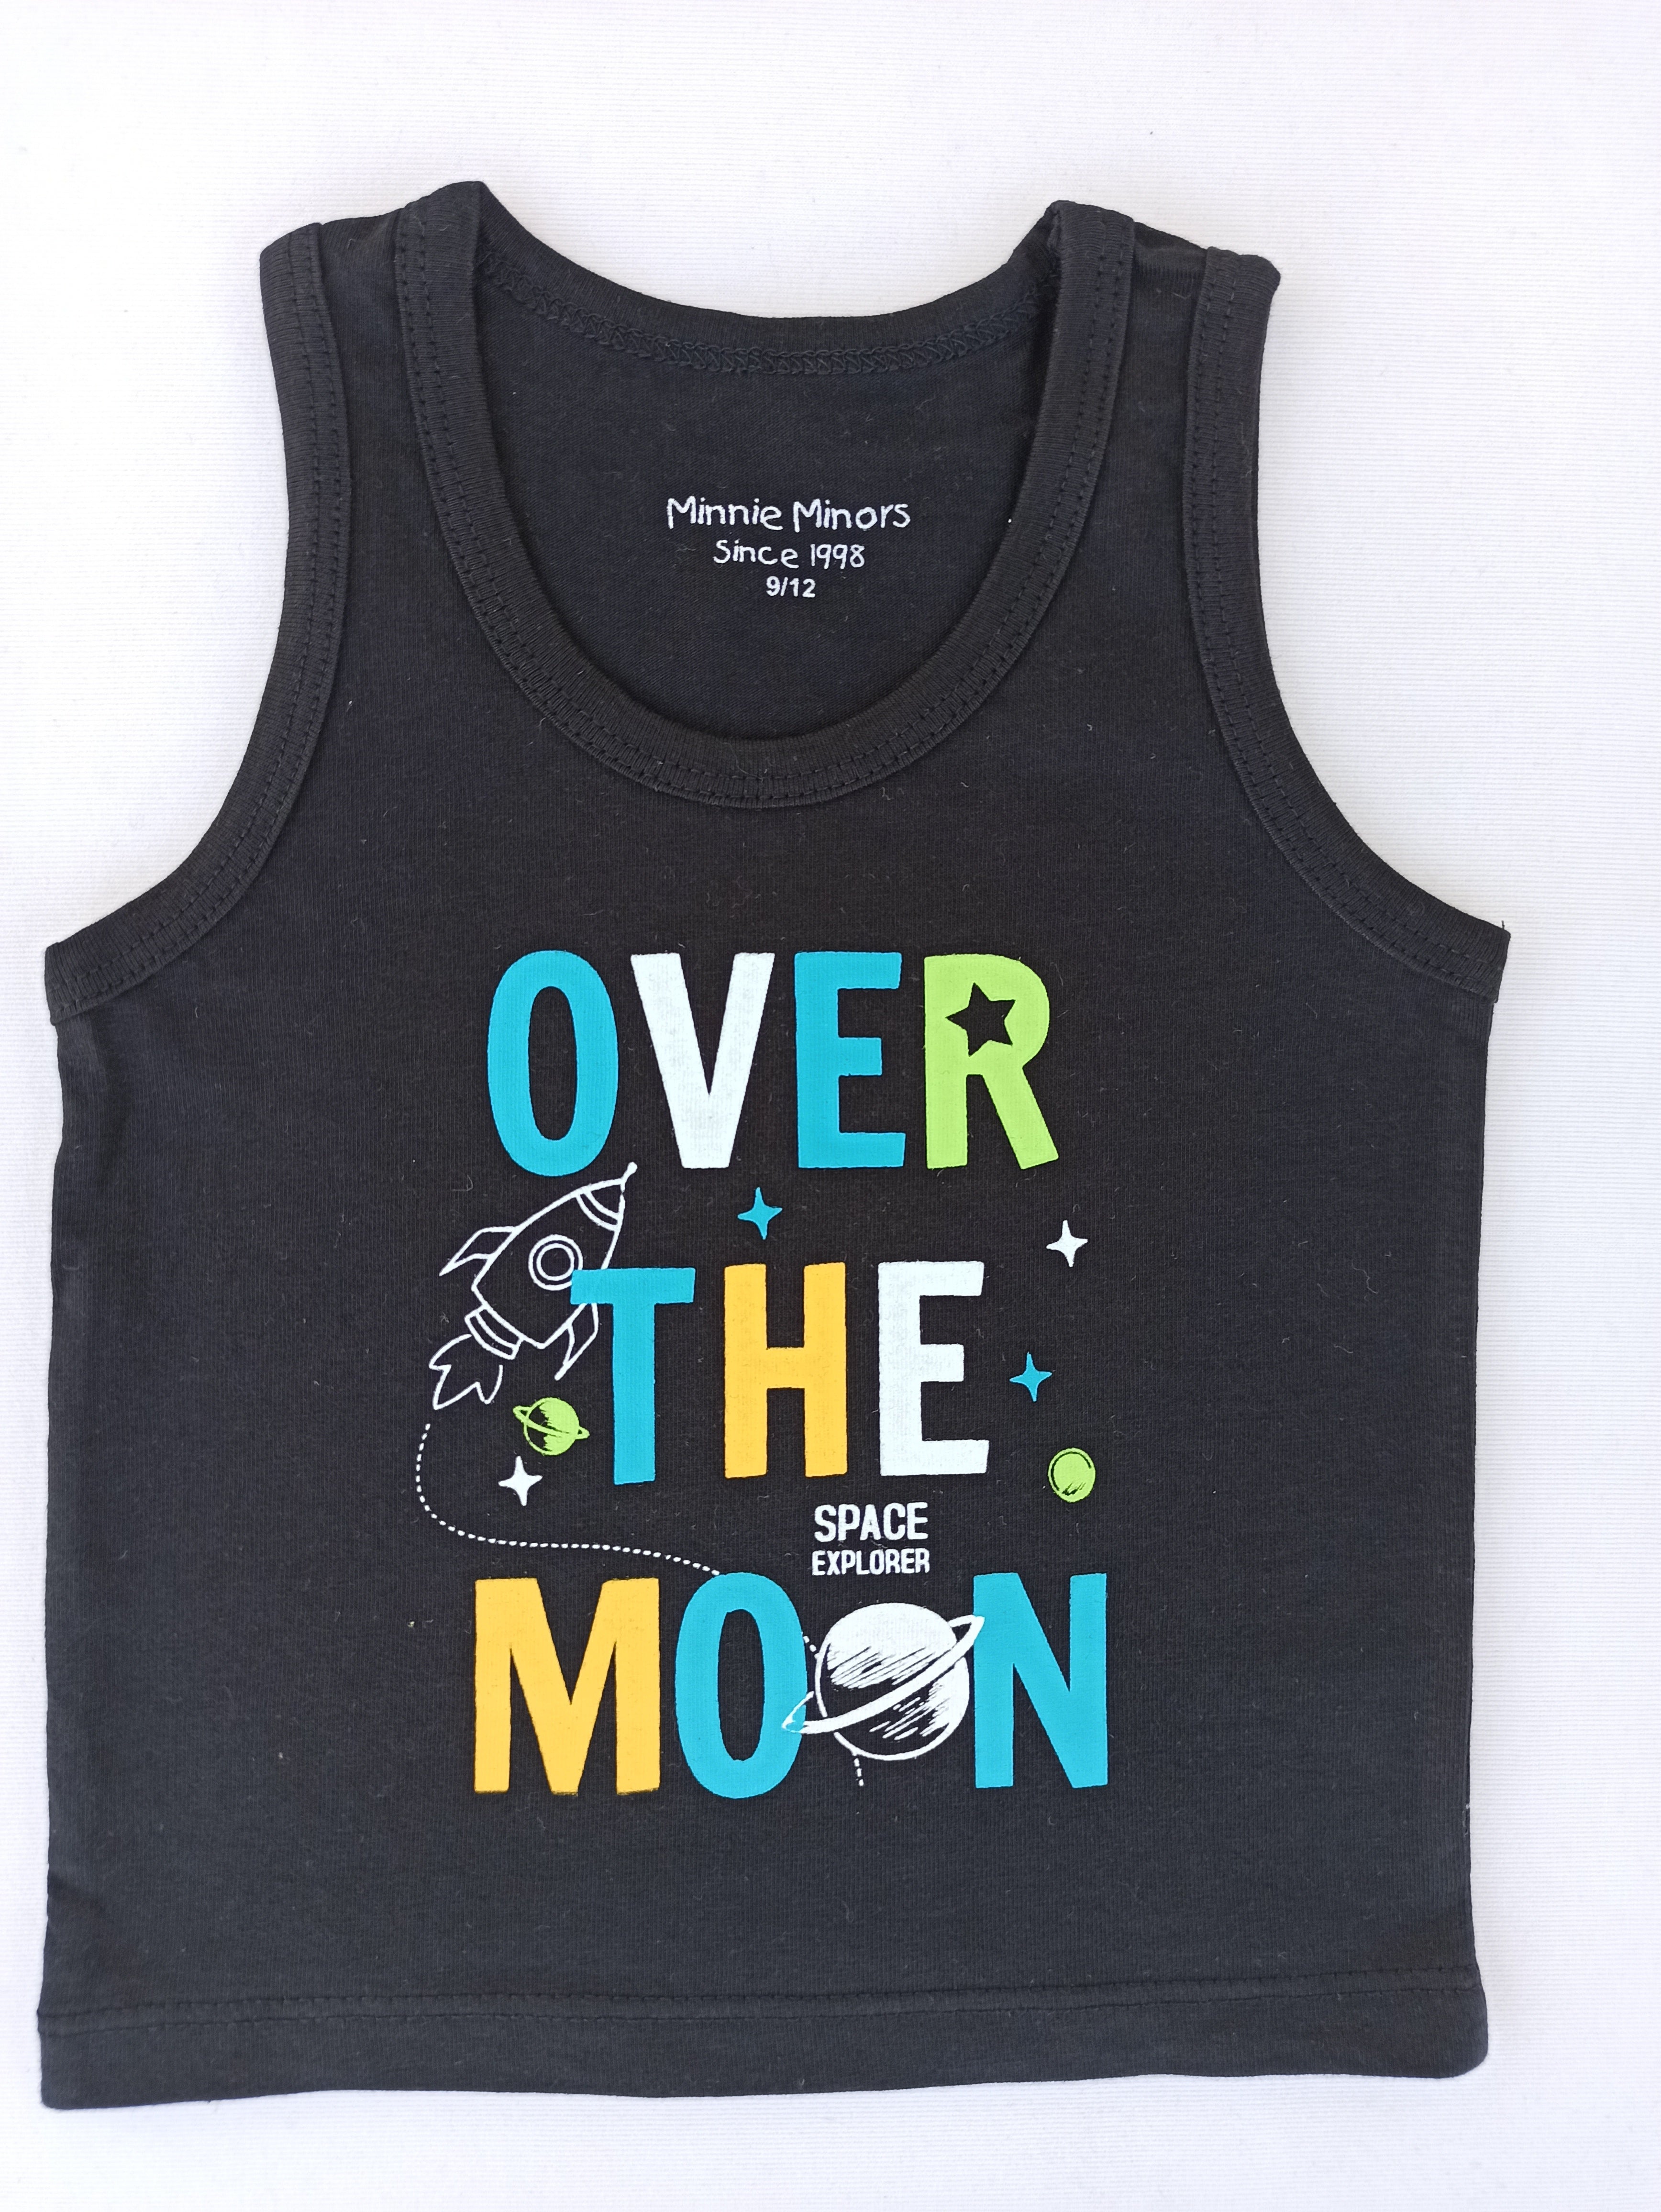 MINNIE MINORS OVER THE MOON GRAPHIC SLEEVELESS T-SHIRT